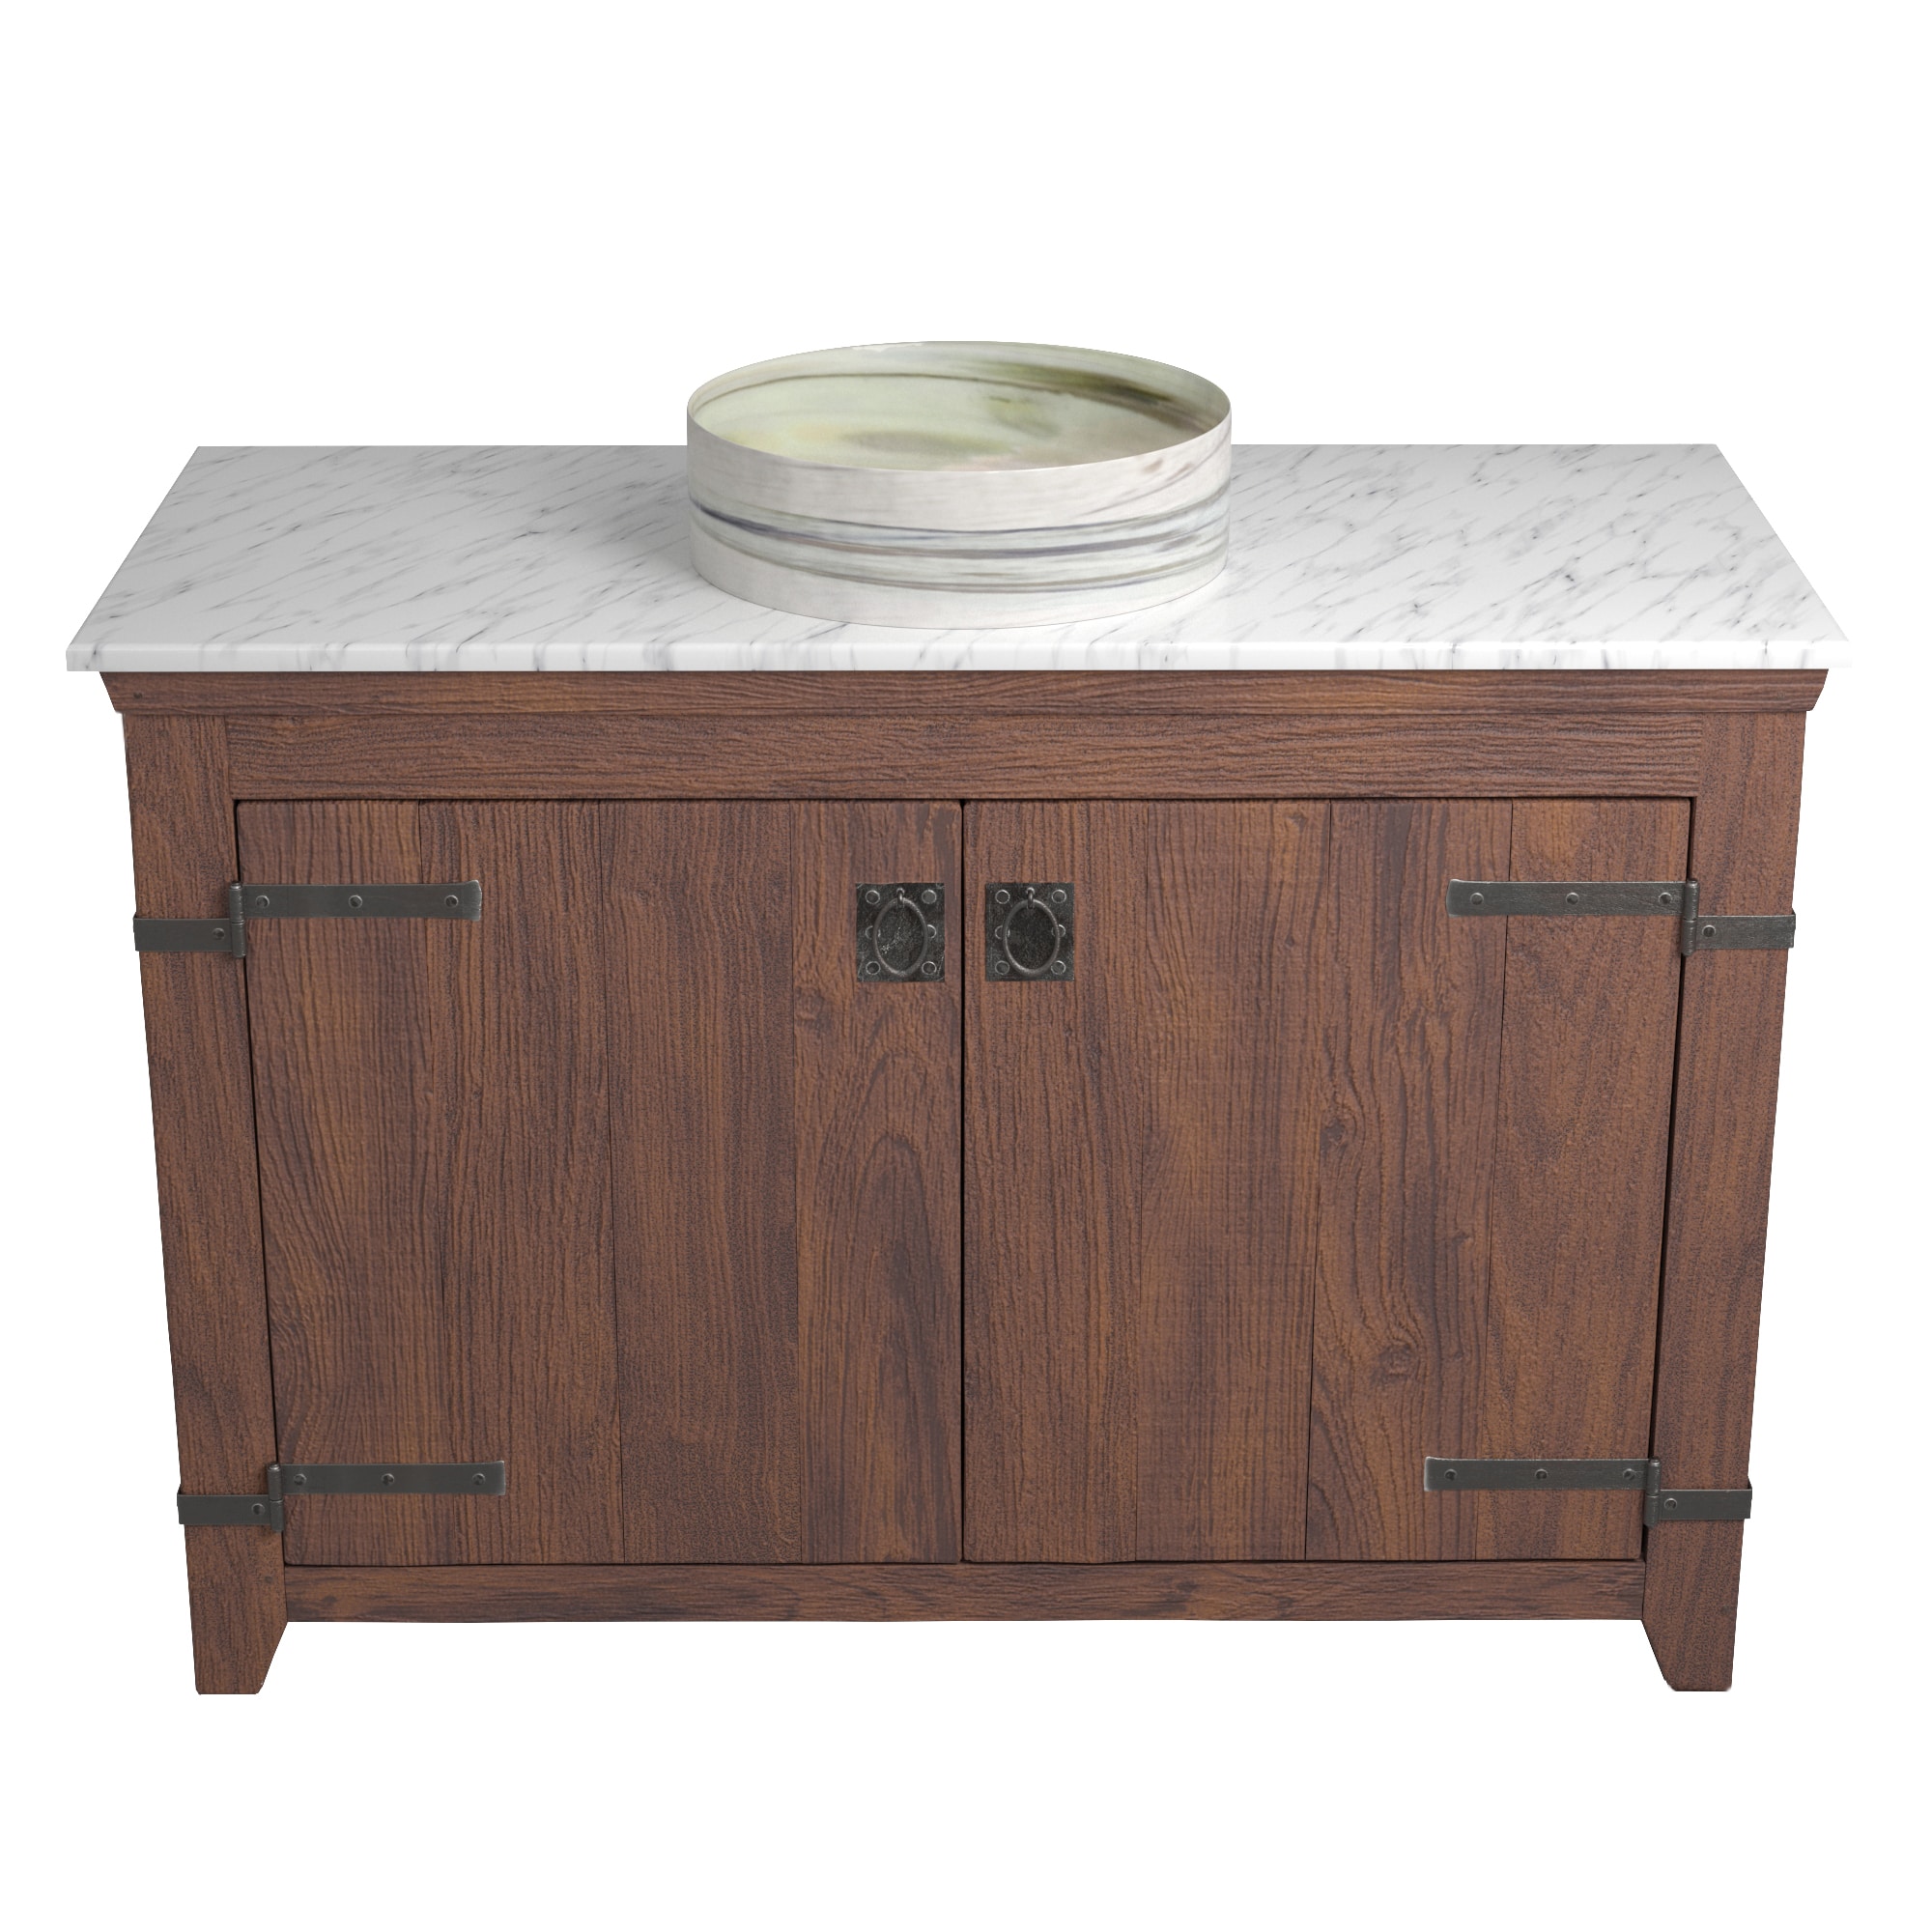 Native Trails 48" Americana Vanity in Chestnut with Carrara Marble Top and Positano in Abalone, No Faucet Hole, BND48-VB-CT-MG-036